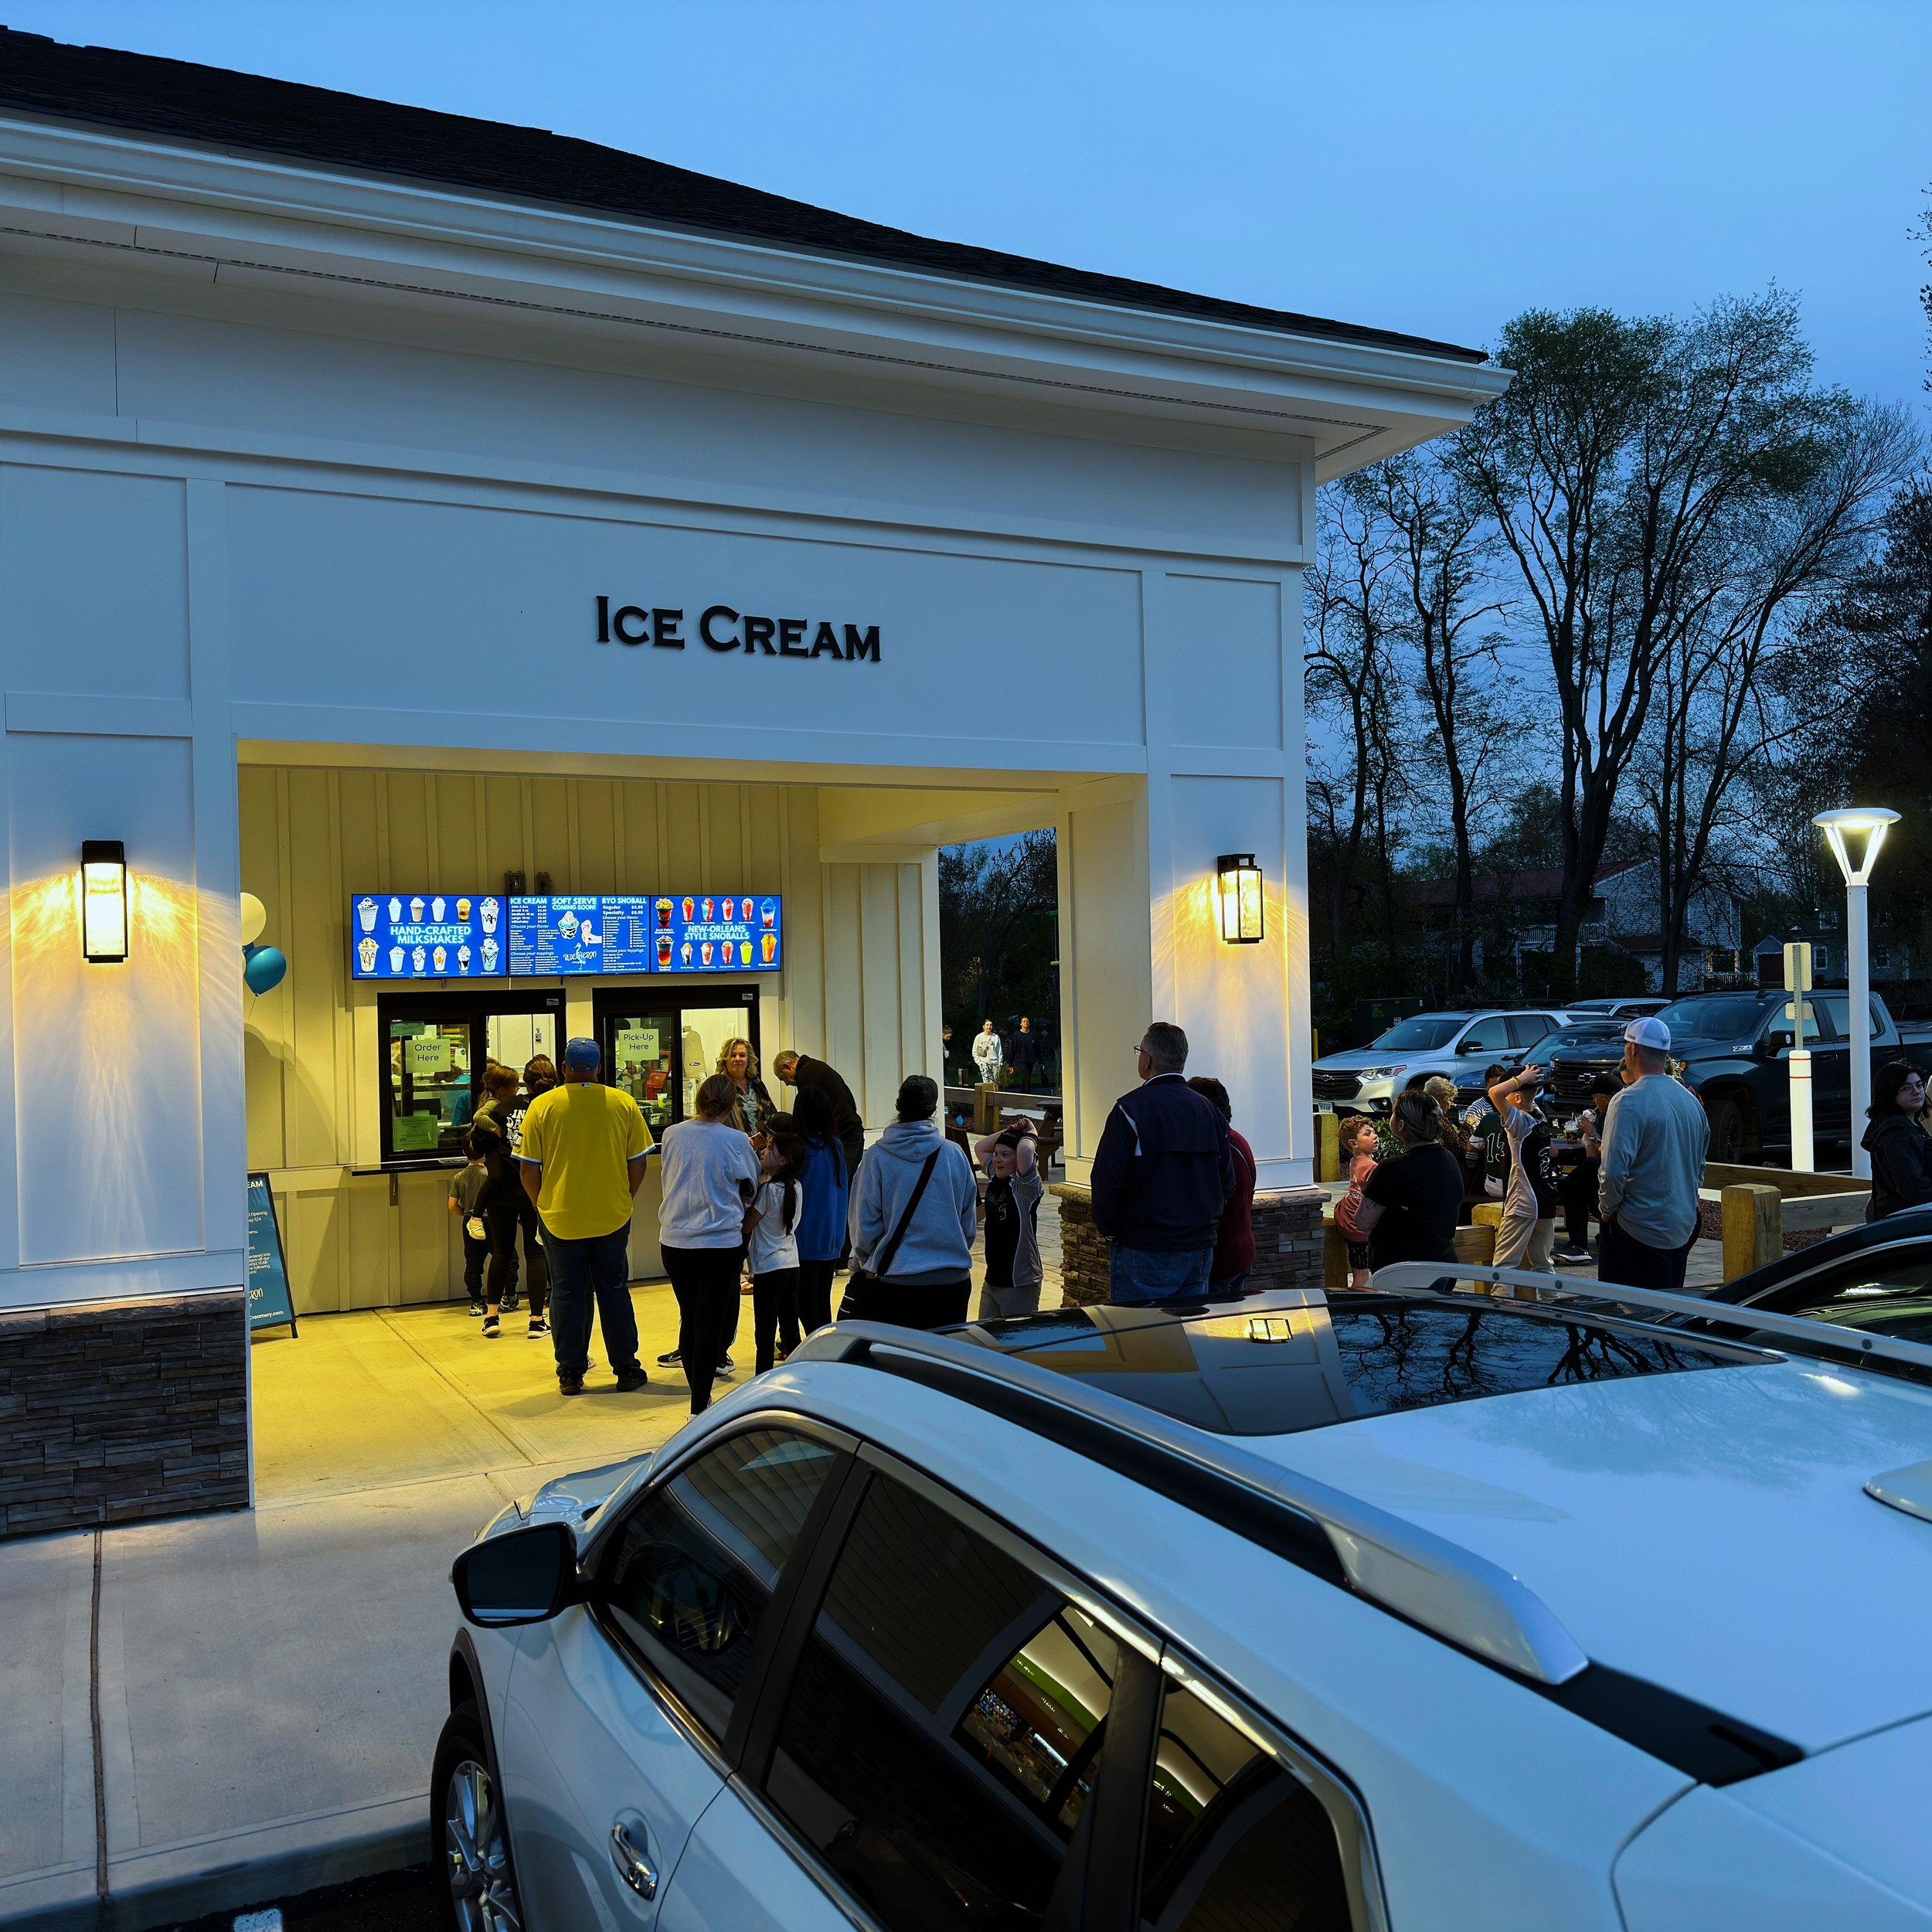 Thank you SO MUCH to everyone who came out to celebrate our grand opening in Enfield with us! We were made to feel very welcome by the people in this community, and we very much look forward to serving all of you for years to come! 🍦 

Congratulatio